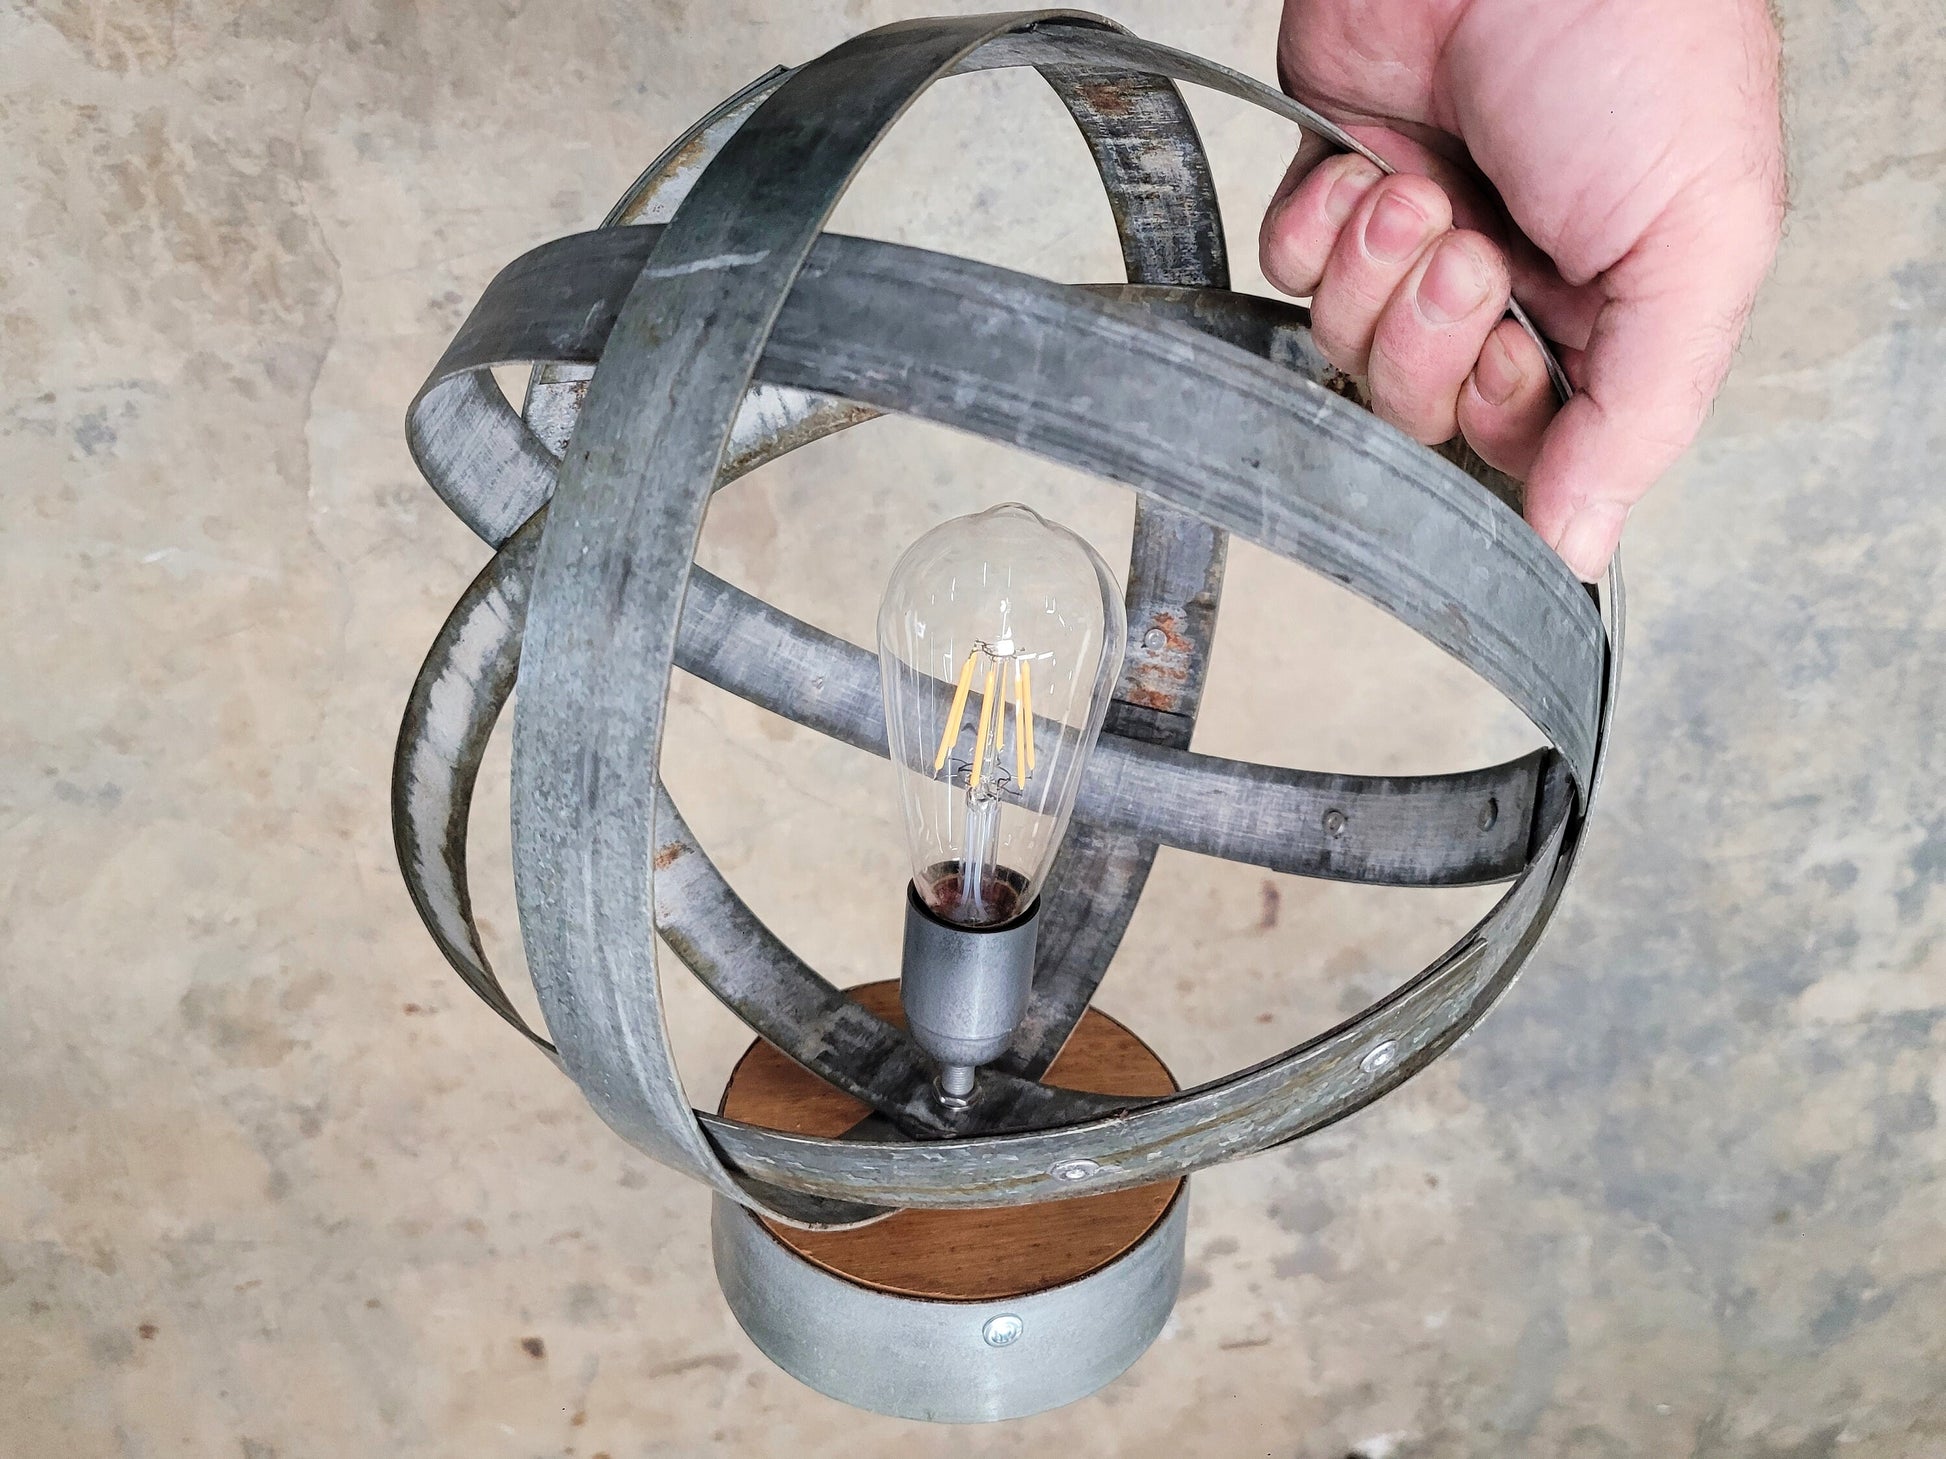 SALE Flush Mount Wine Barrel Ring Pendant Light - Atom - Made from salvaged California wine barrel rings. 100% Recycled! 112223-1